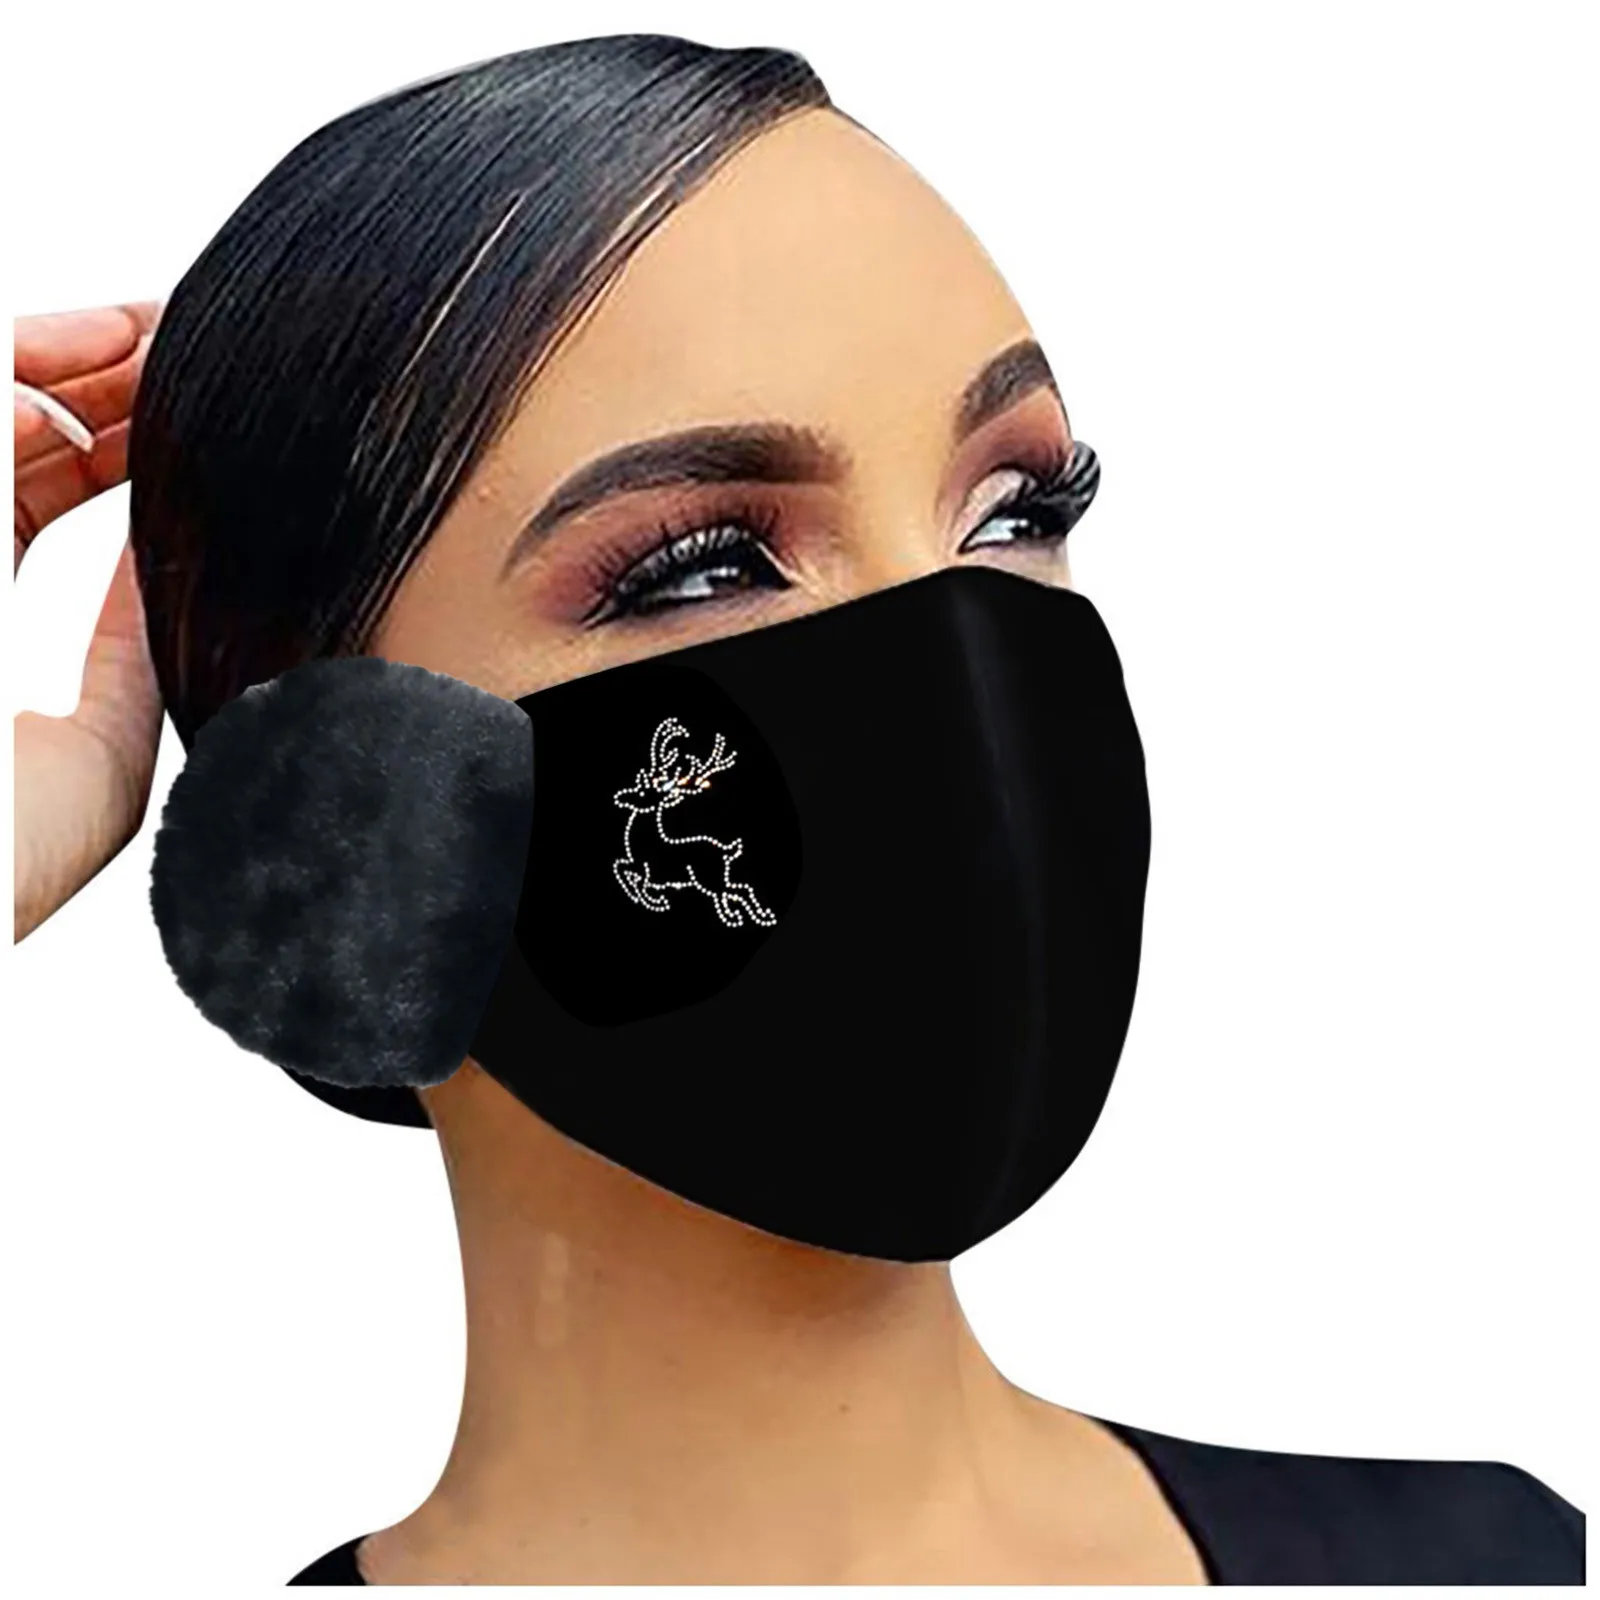 

1pc Adult Winter Drilling Mask Unisex Mouth Mask Pm2.5 Ear Warm Reusable Washable Facemask Windproof Outdoor Cotton Masks d5